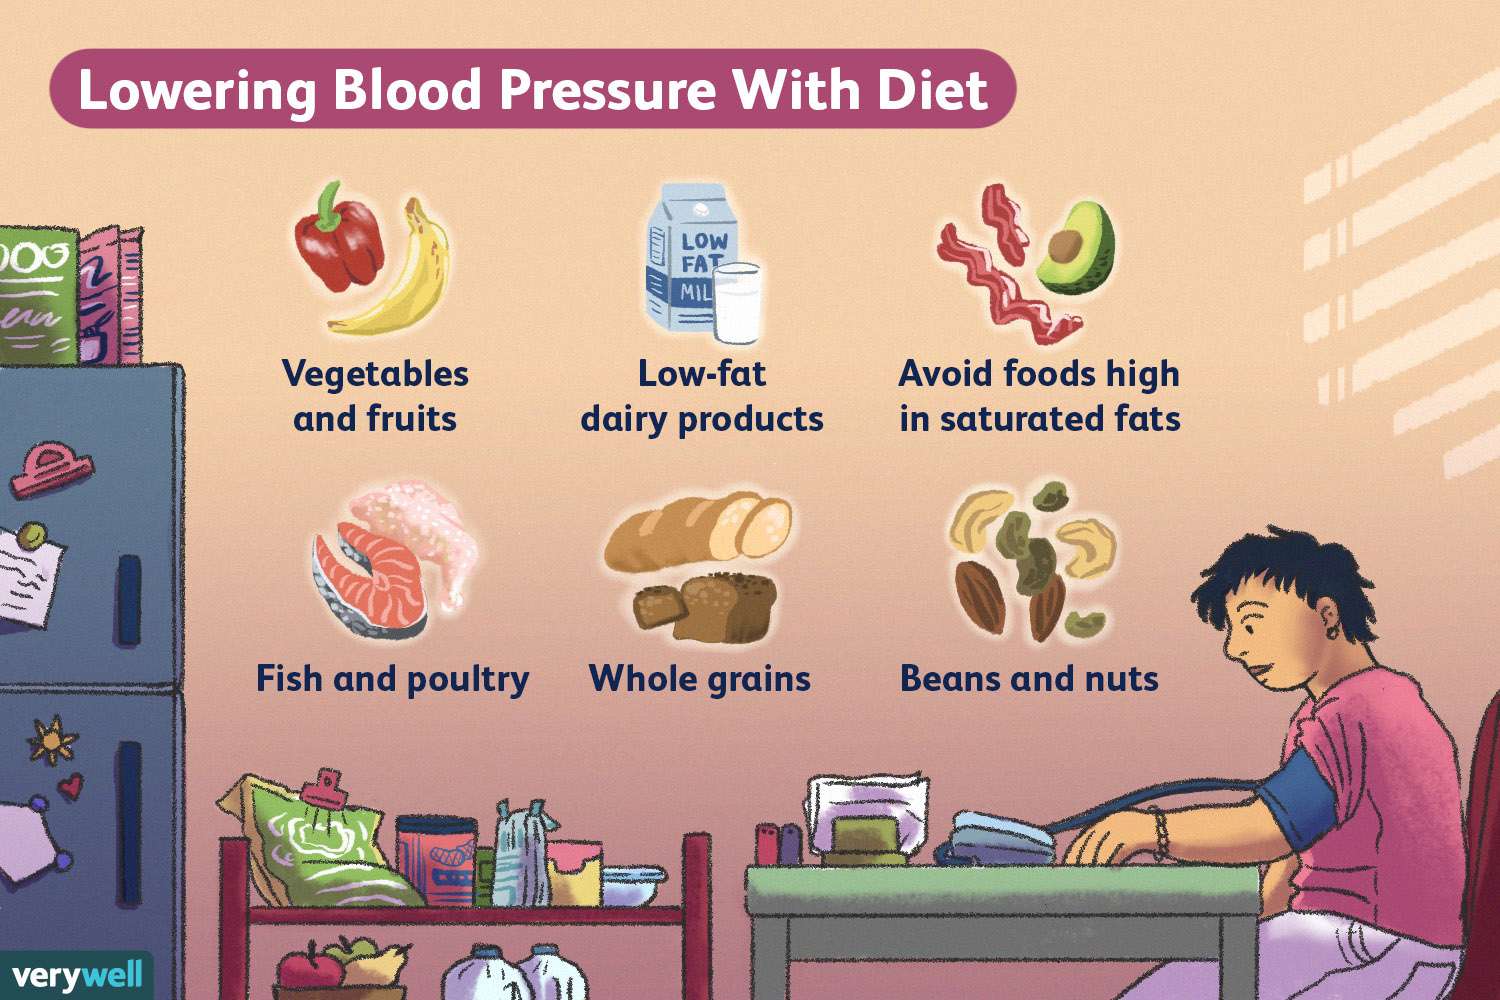 7 Second Trick to Lower Blood Pressure